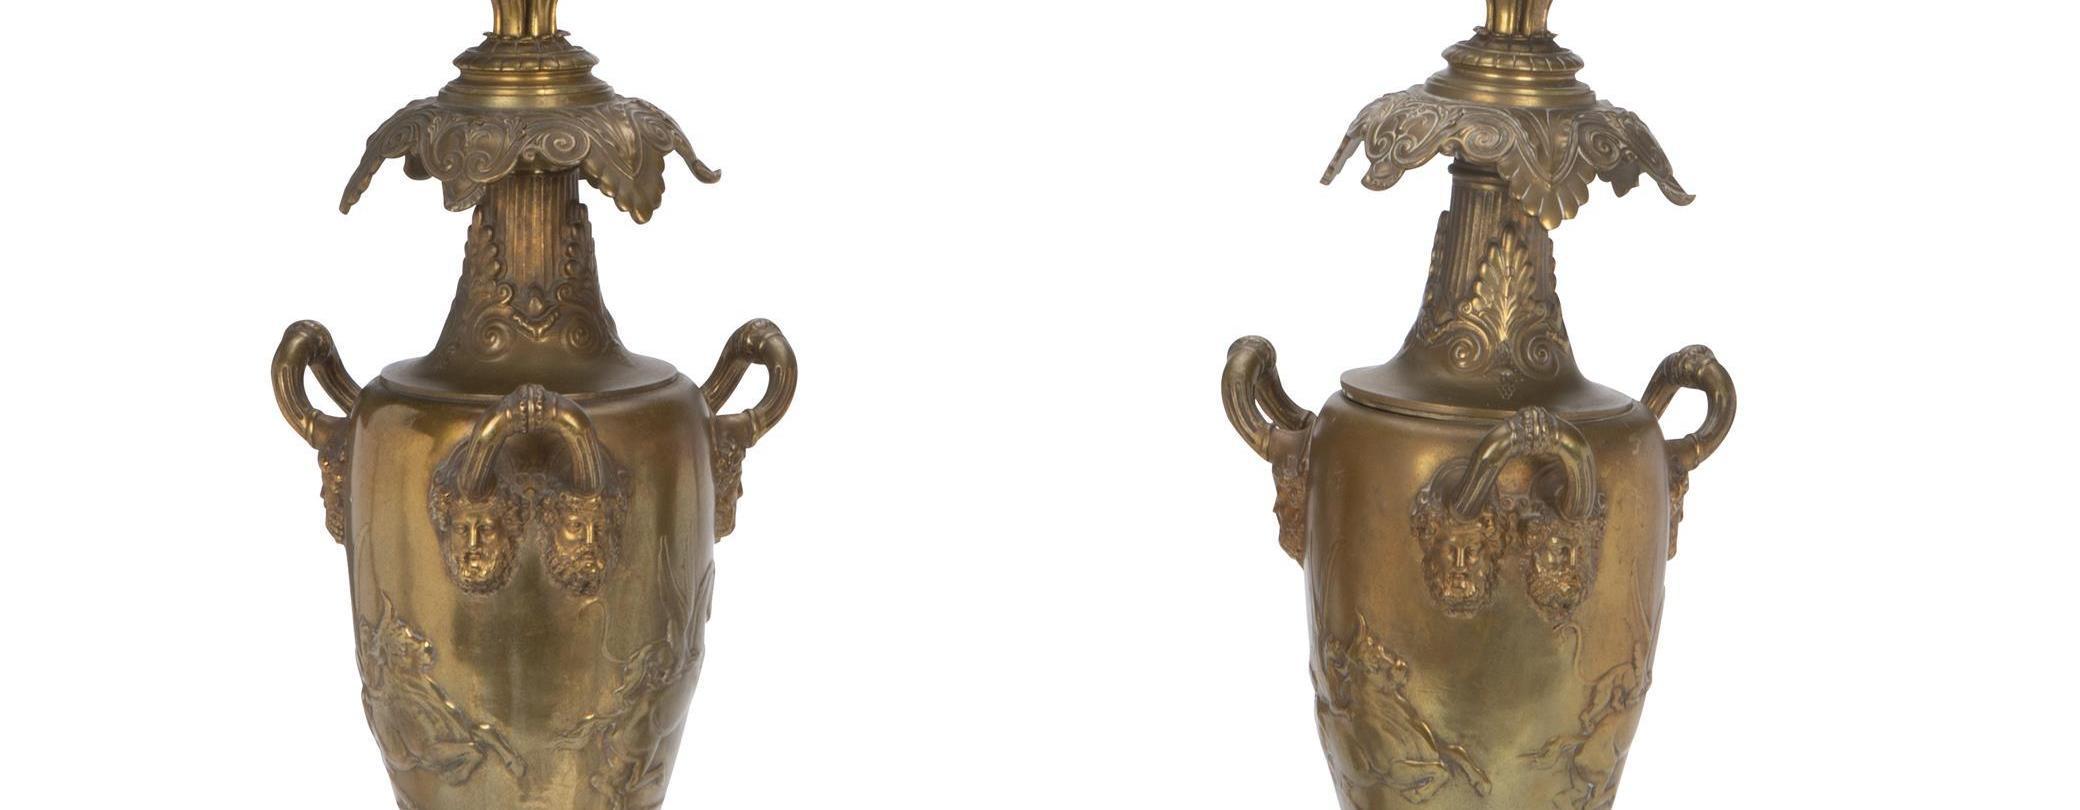 Pair of French Bronze Candelabra Lamps, Early 20th Century For Sale 1